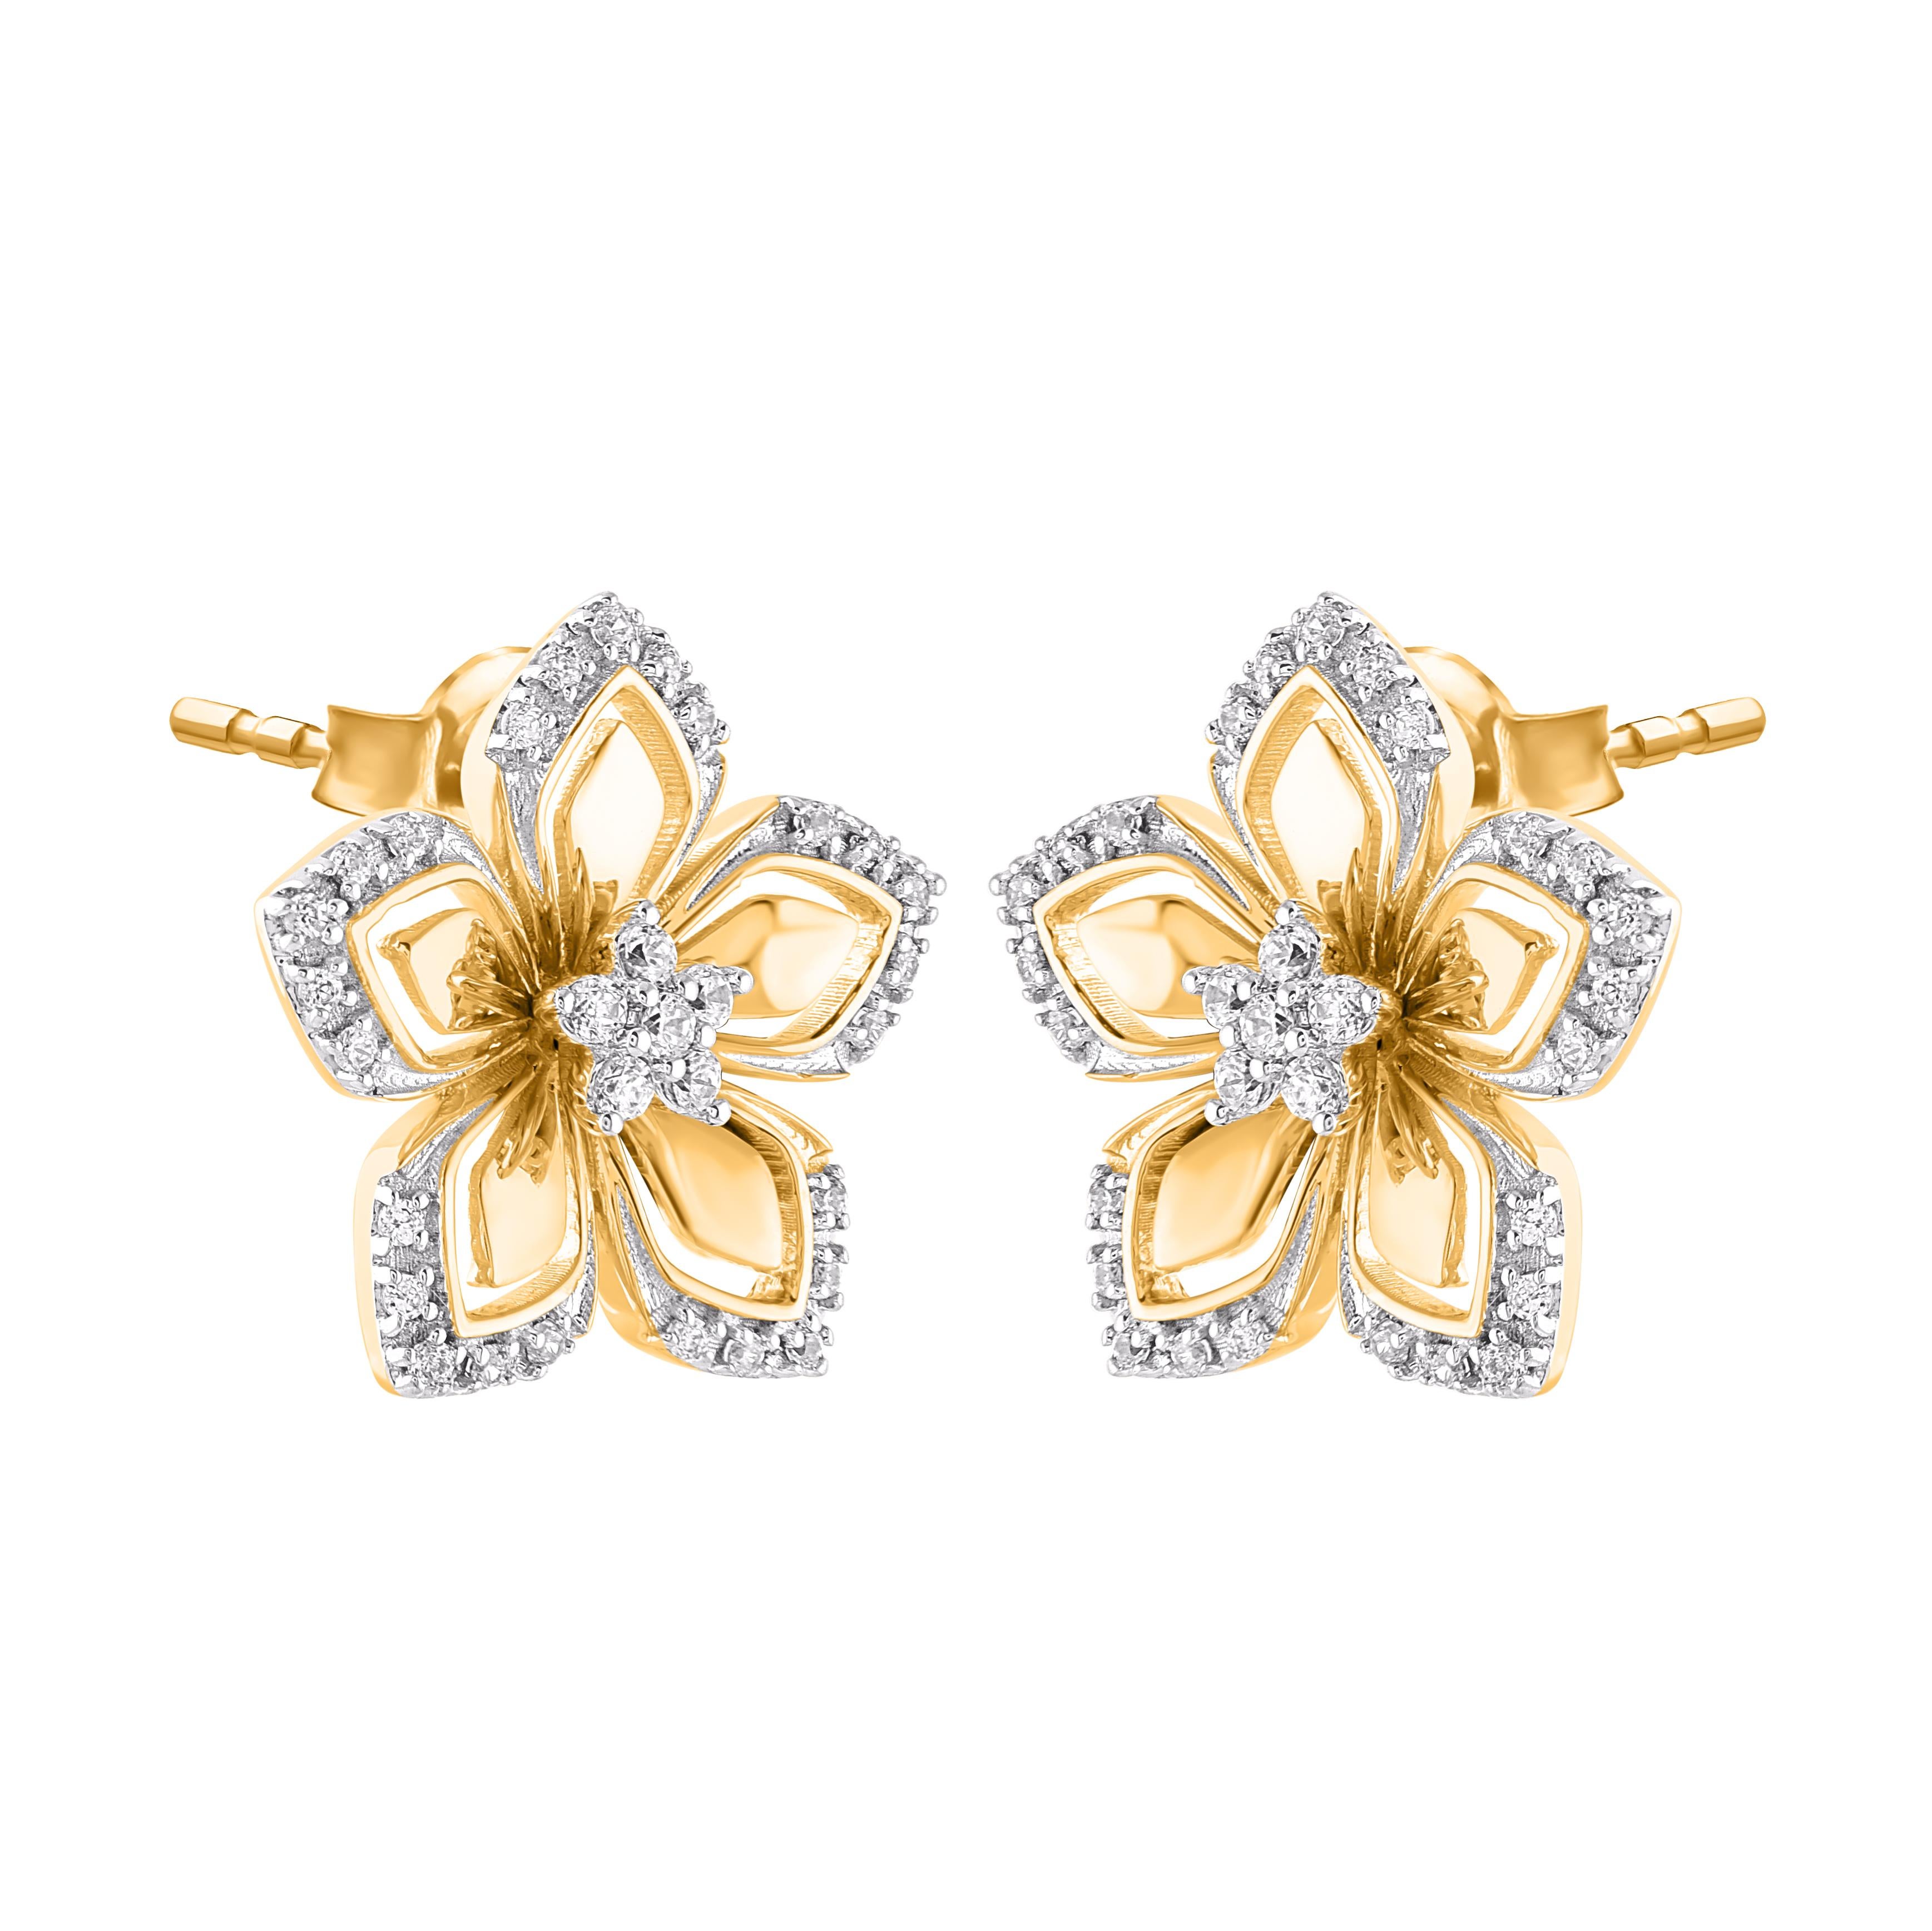 Top of your favorite look with this stunning diamond floral design earrings. The earrings is crafted from 14-karat yellow gold and features 62 single cut white diamond set in prong setting, it shines brightly in H-I color I2 clarity. A high polish